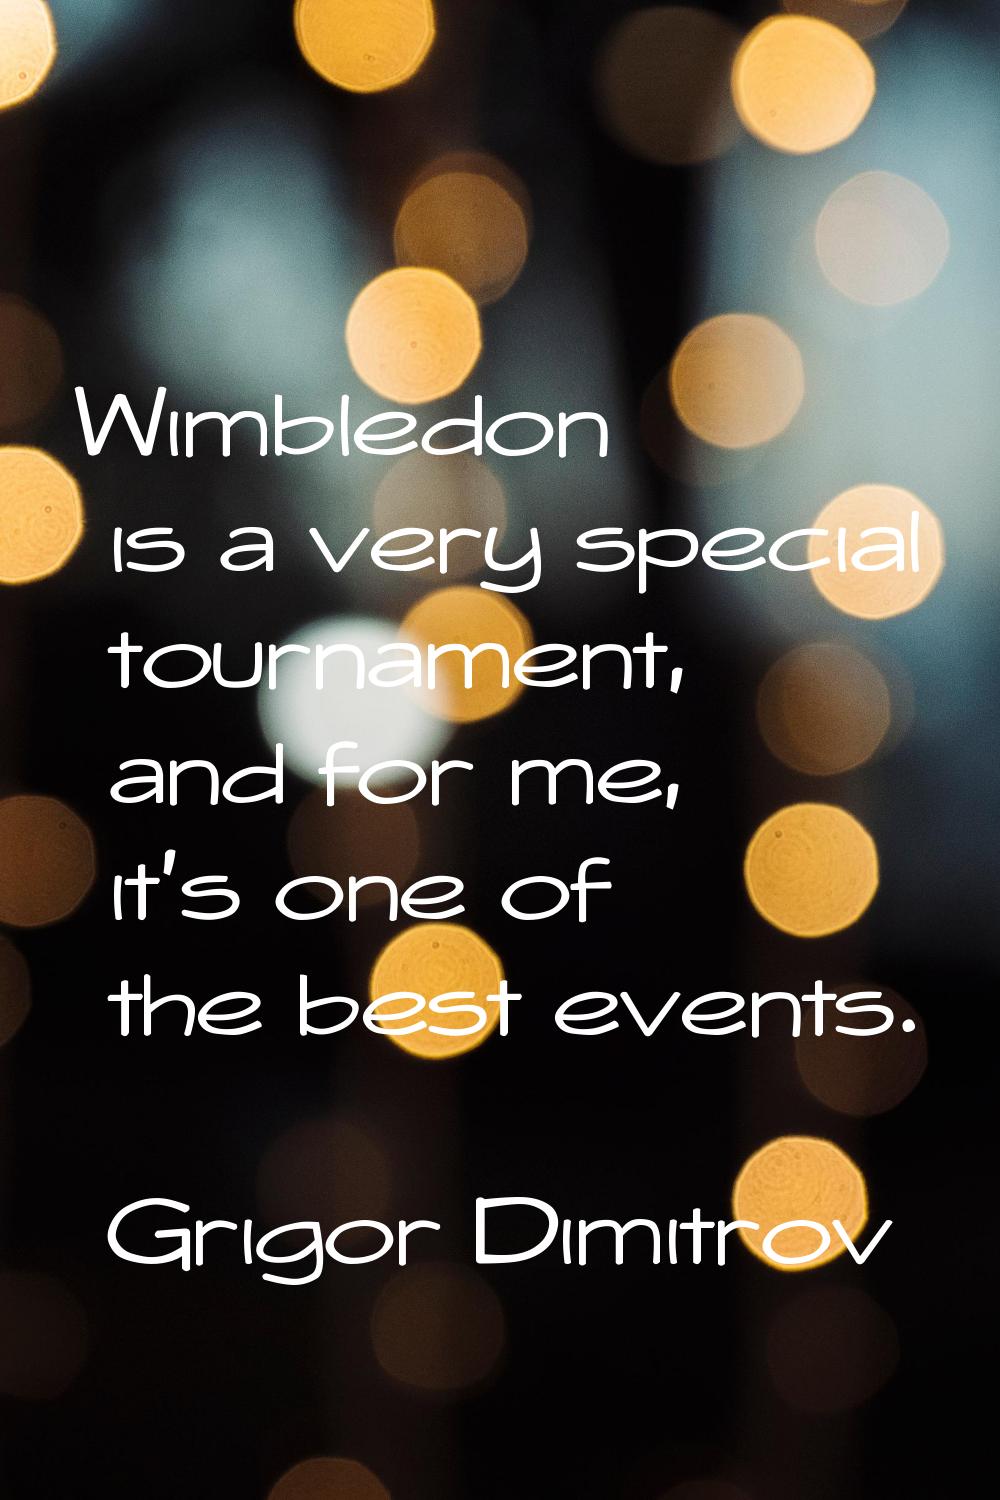 Wimbledon is a very special tournament, and for me, it's one of the best events.